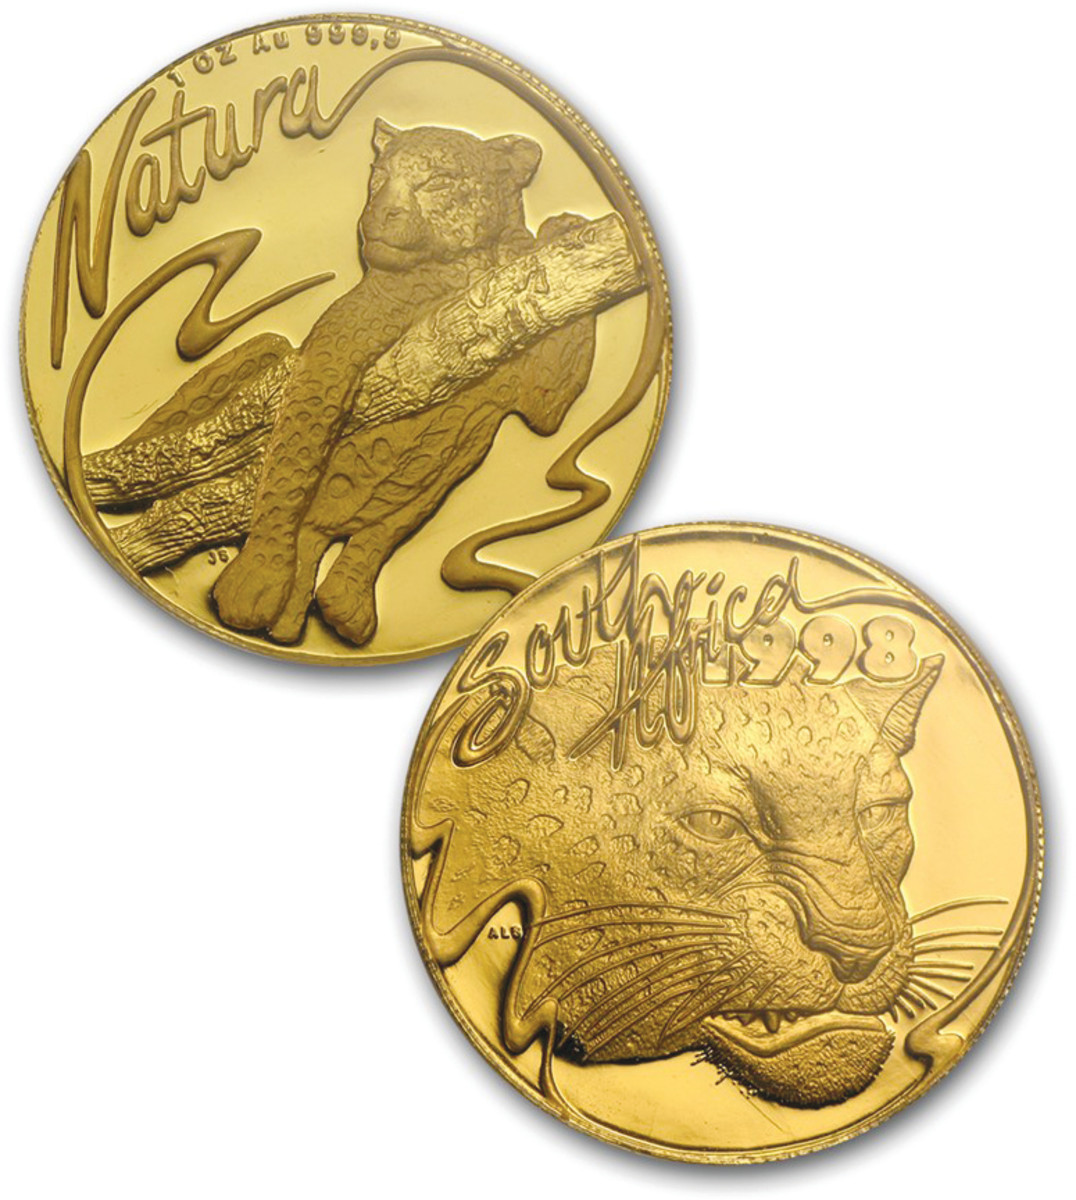 The Singapore Coin Show award-winning 1998 Leopard featured shifting tails off the ends of the legends.